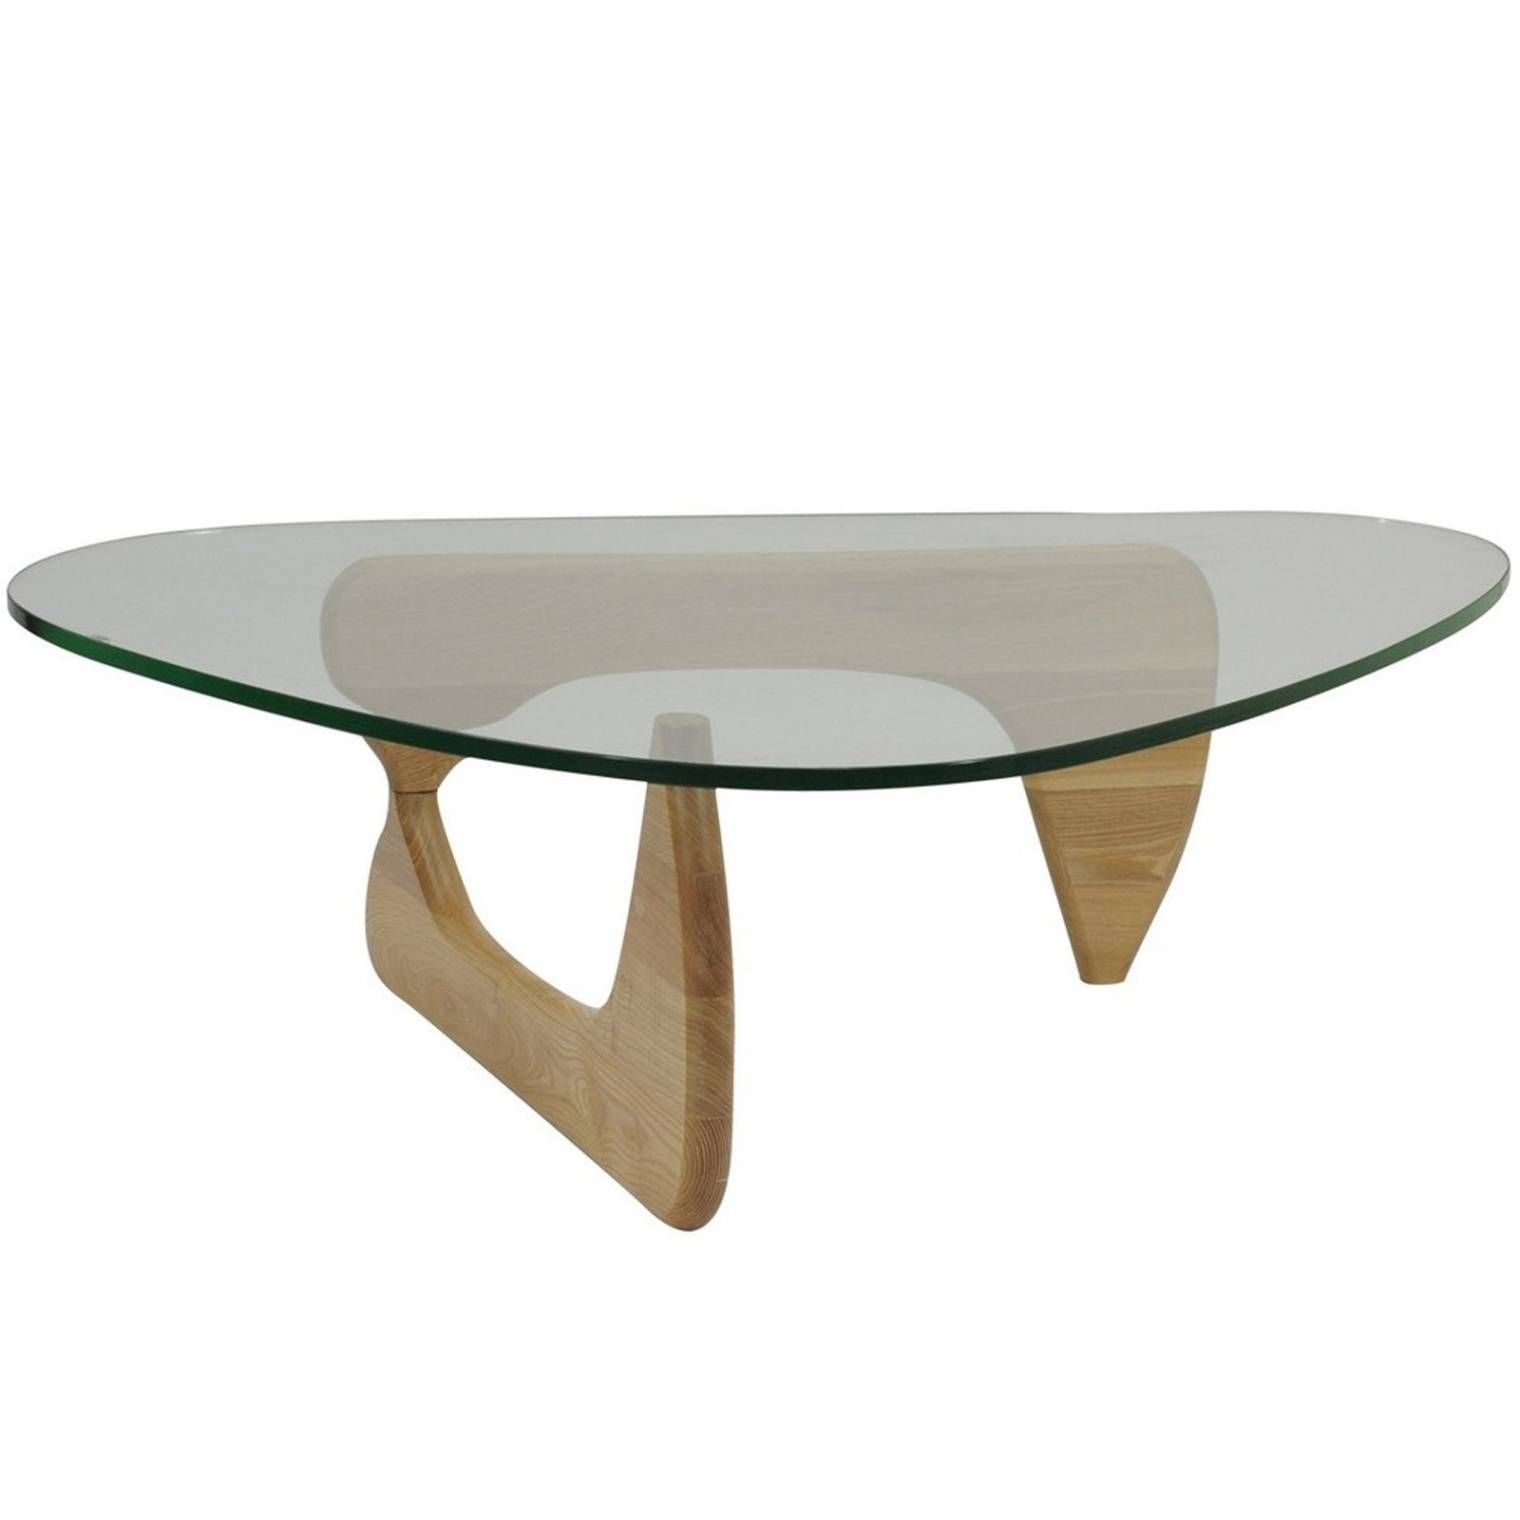 New Wood And Glass Coffee Table – Table Ideas With Regard To Wooden And Glass Coffee Tables (View 15 of 30)